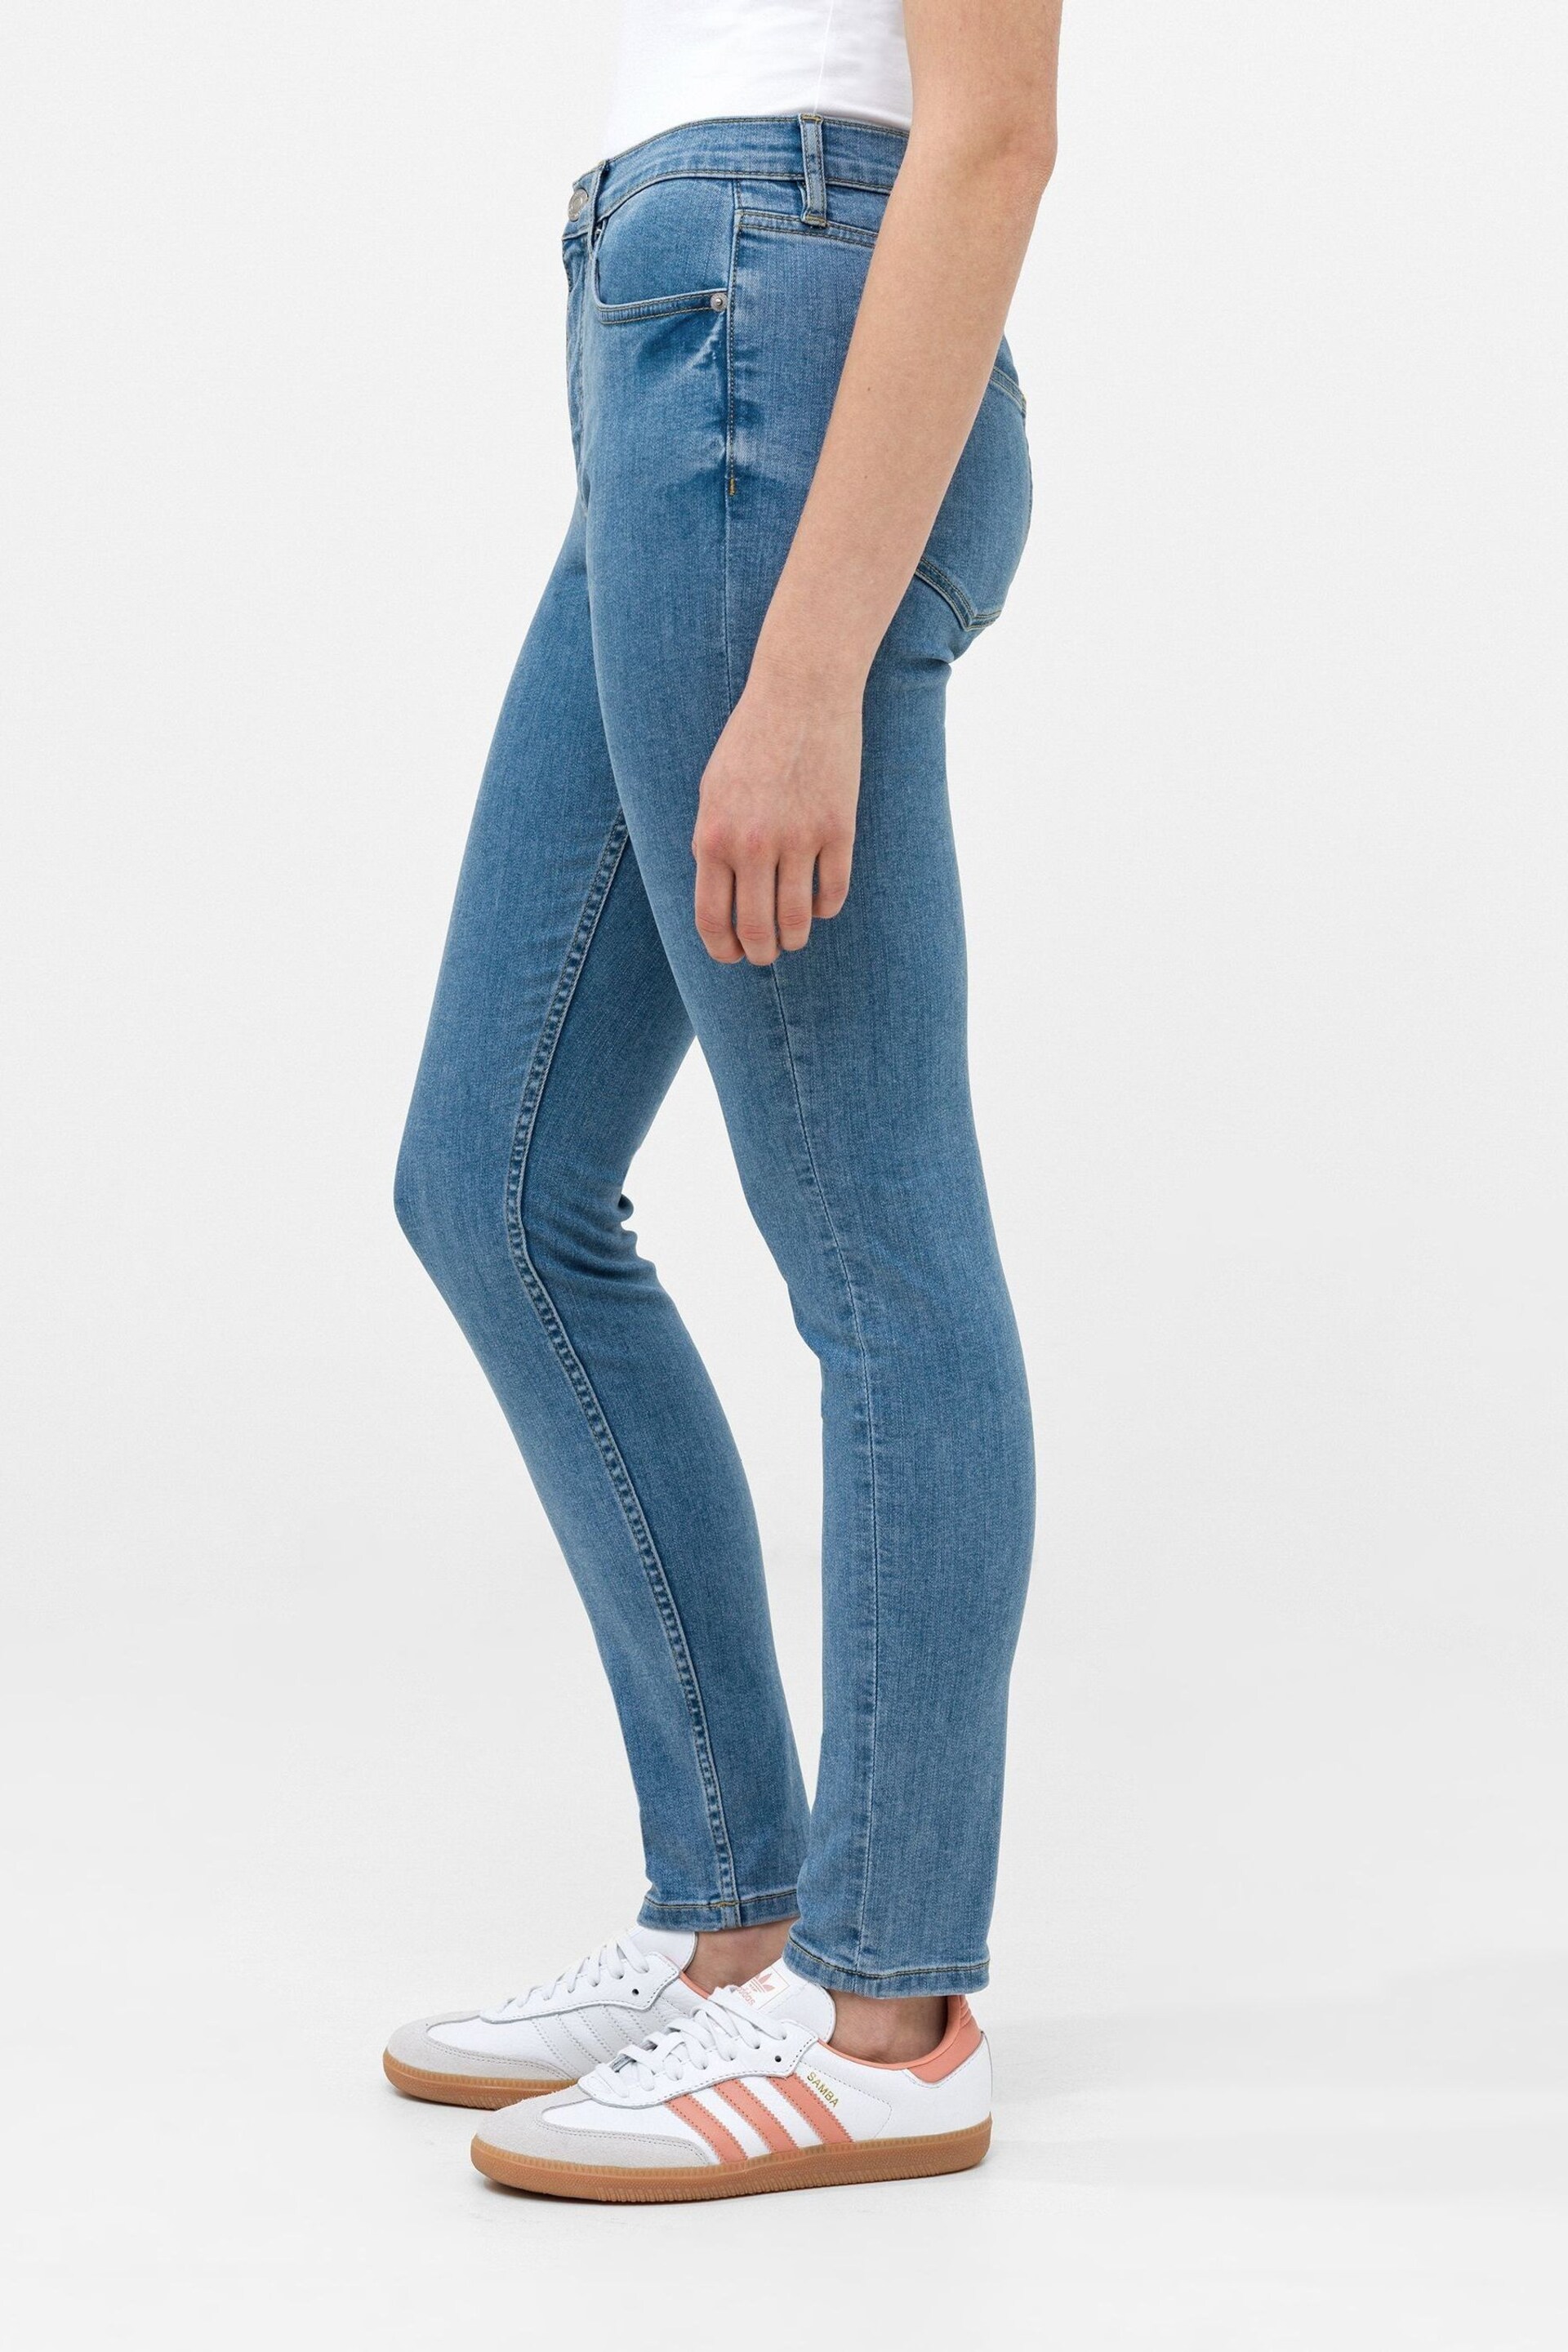 French Connection Soft Stretch Skinny High Rise Jeans - Image 3 of 4